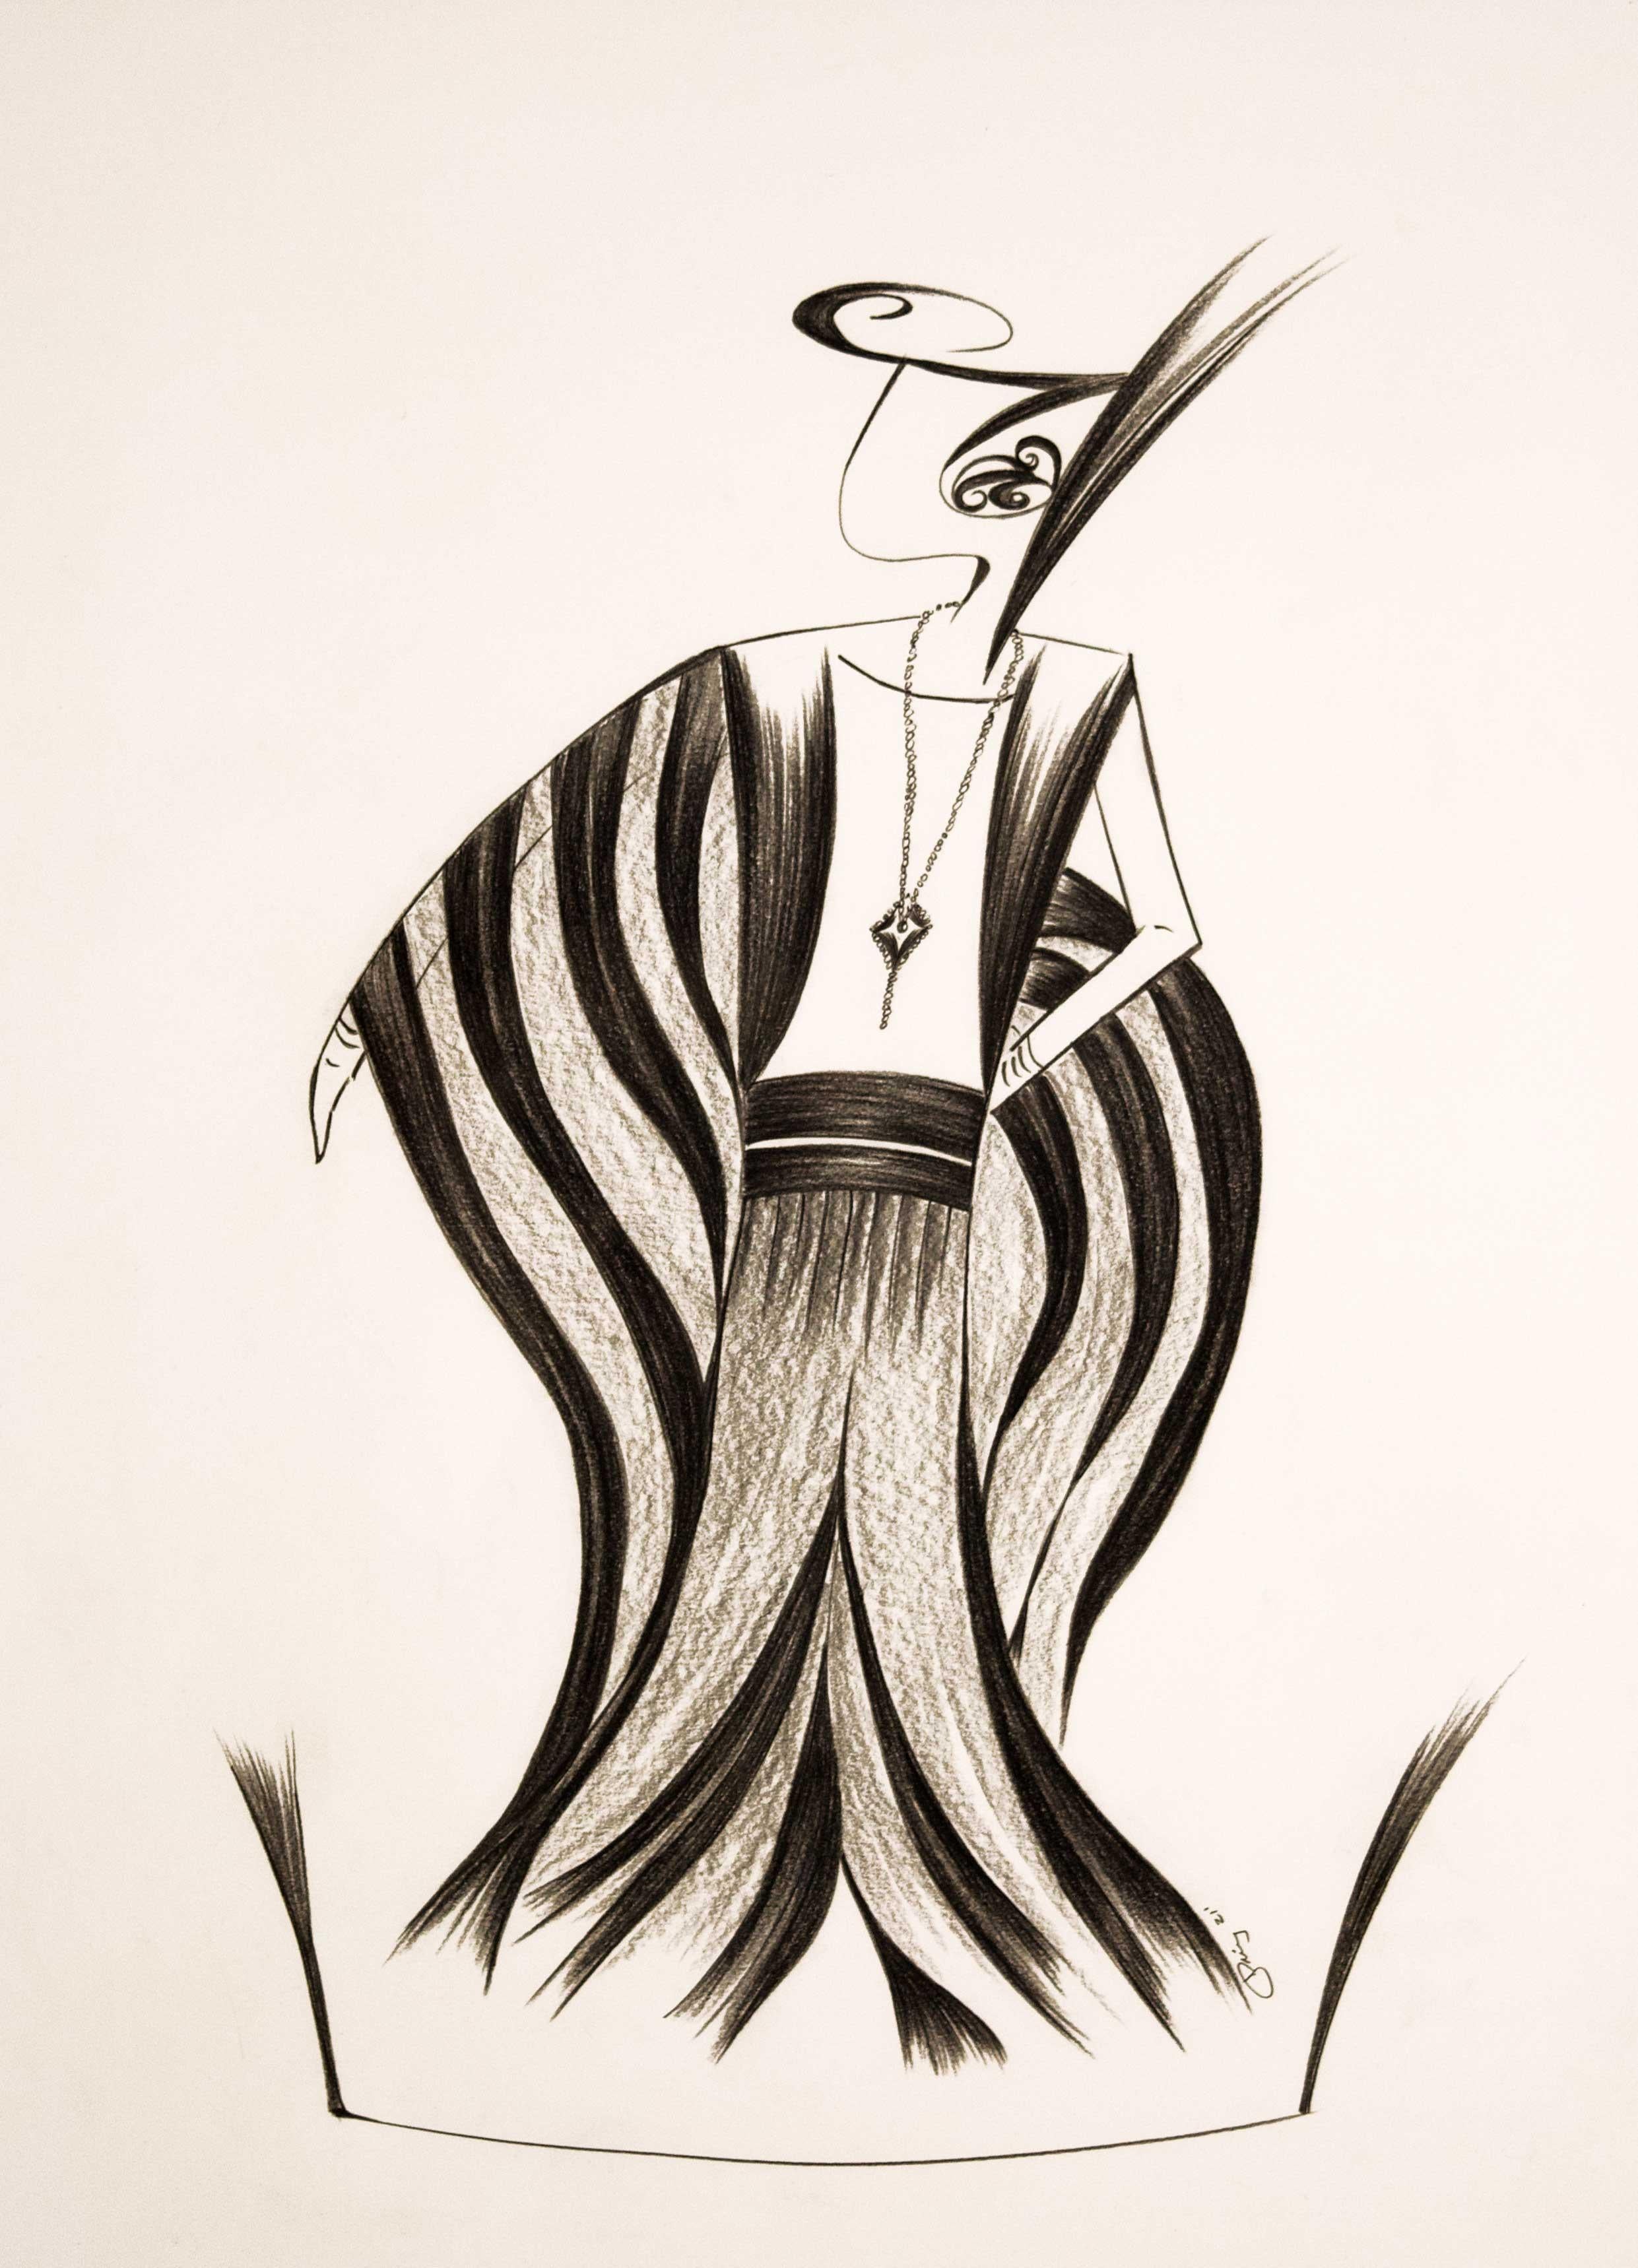 'Ava (1940s Art Deco Fashion Rendition)' is an original drawing by the American artist Jorge Ruiz-Martinez. The artist works in an art deco style, imagining graceful figures in historic costume through that stylized lens. Art Deco architecture and